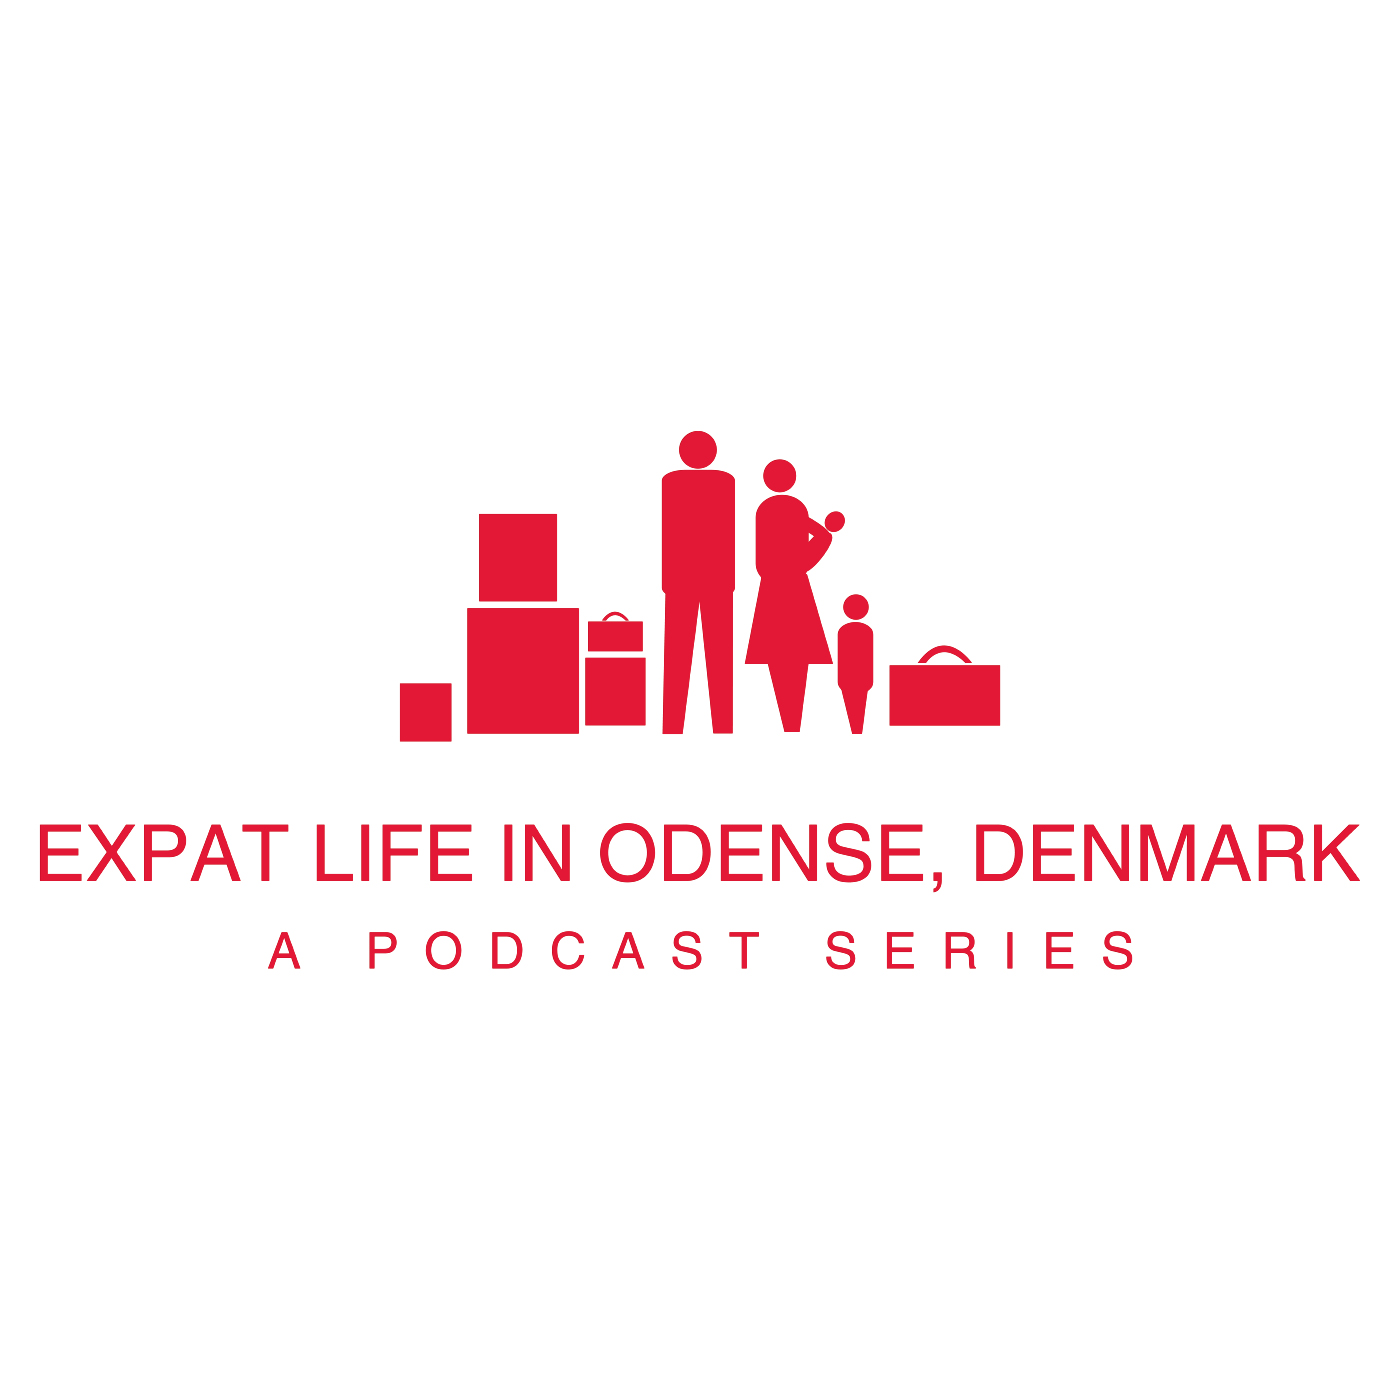 The Expat Life in Odense Podcast Series